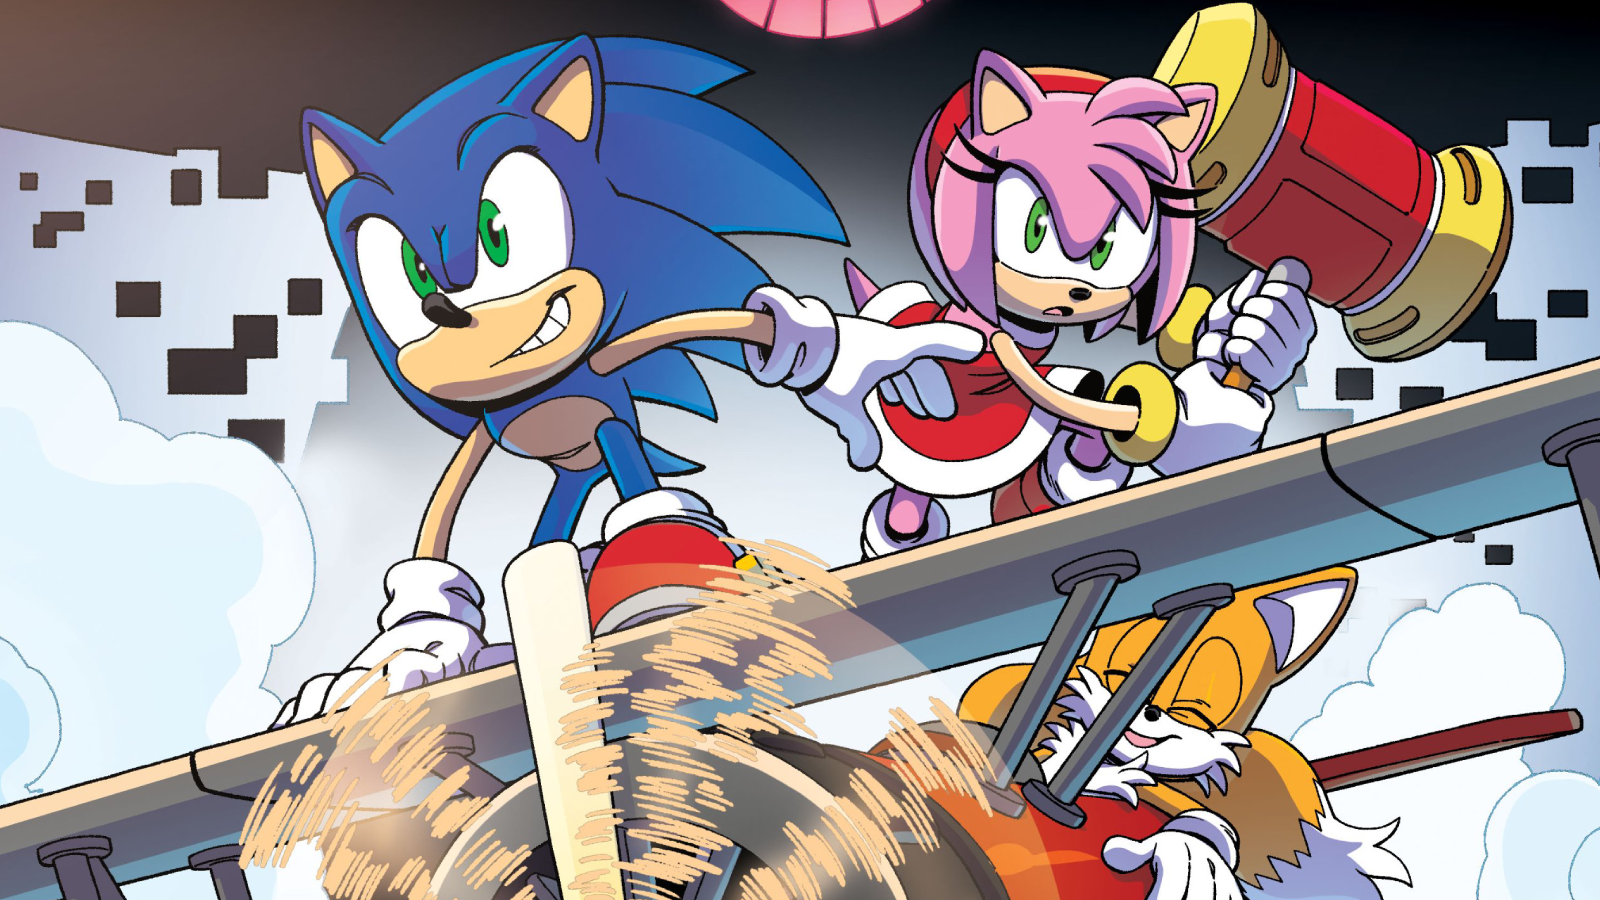 Sonic Frontiers has been added to the PlayStation Plus Deluxe